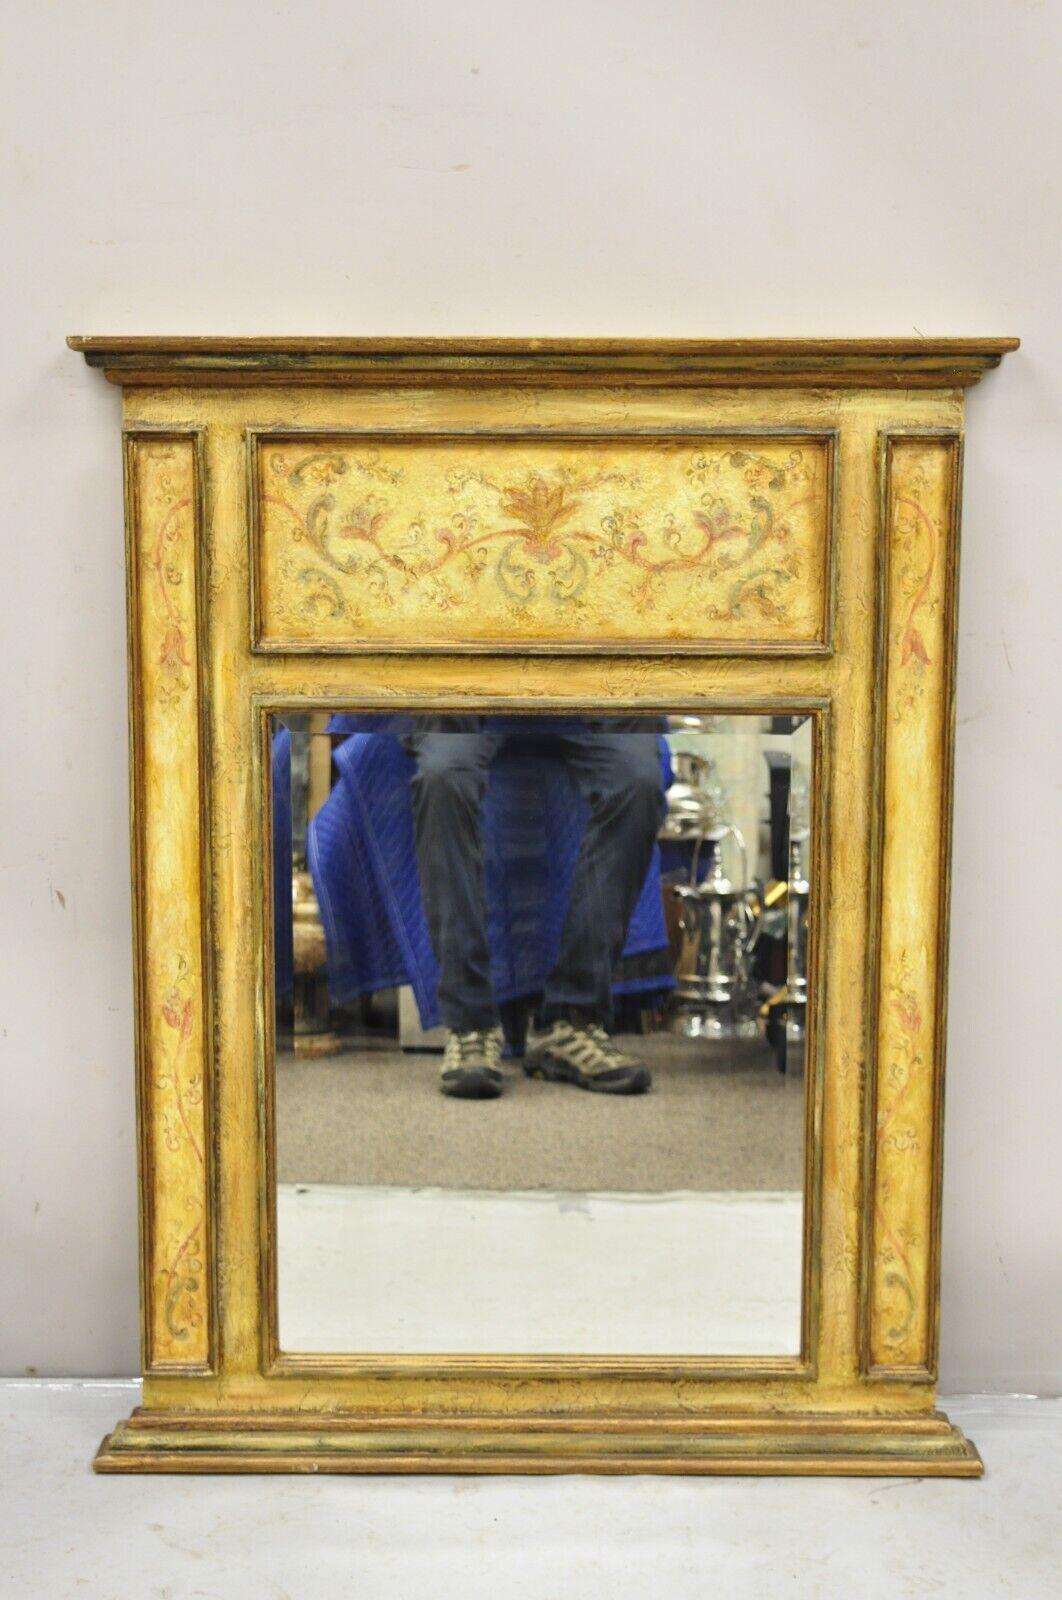 Decorator Shabby and Chic Italian Style Tuscan Distress Painted Wall Mirror. Circa 21st Century. Measurements: 43.5